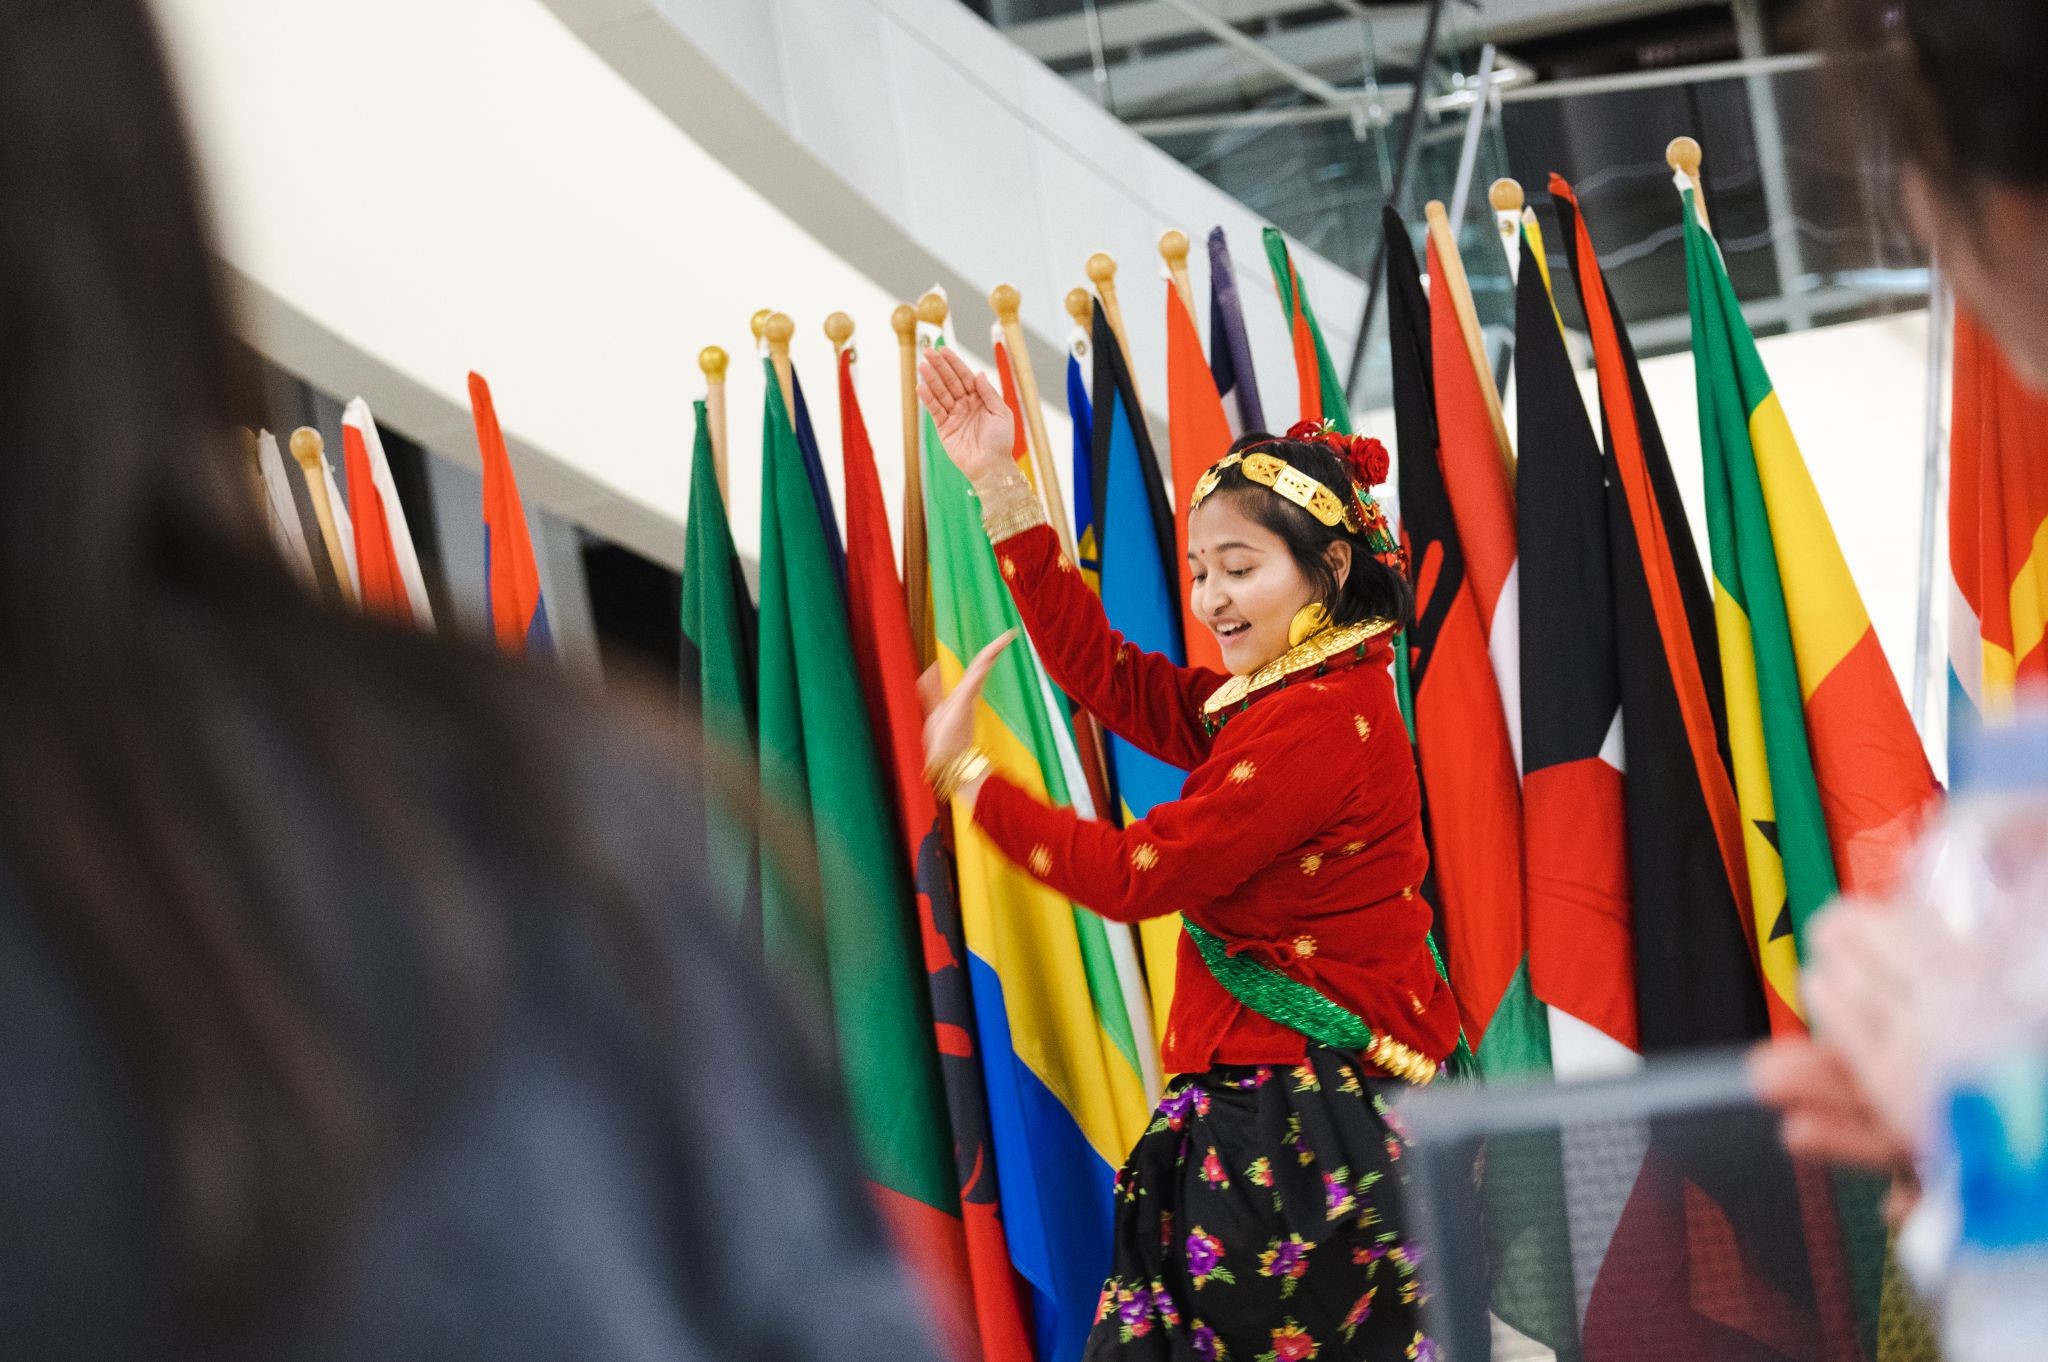 Sandhya Karki, a junior from Nepal, performs a traditional dance from her country